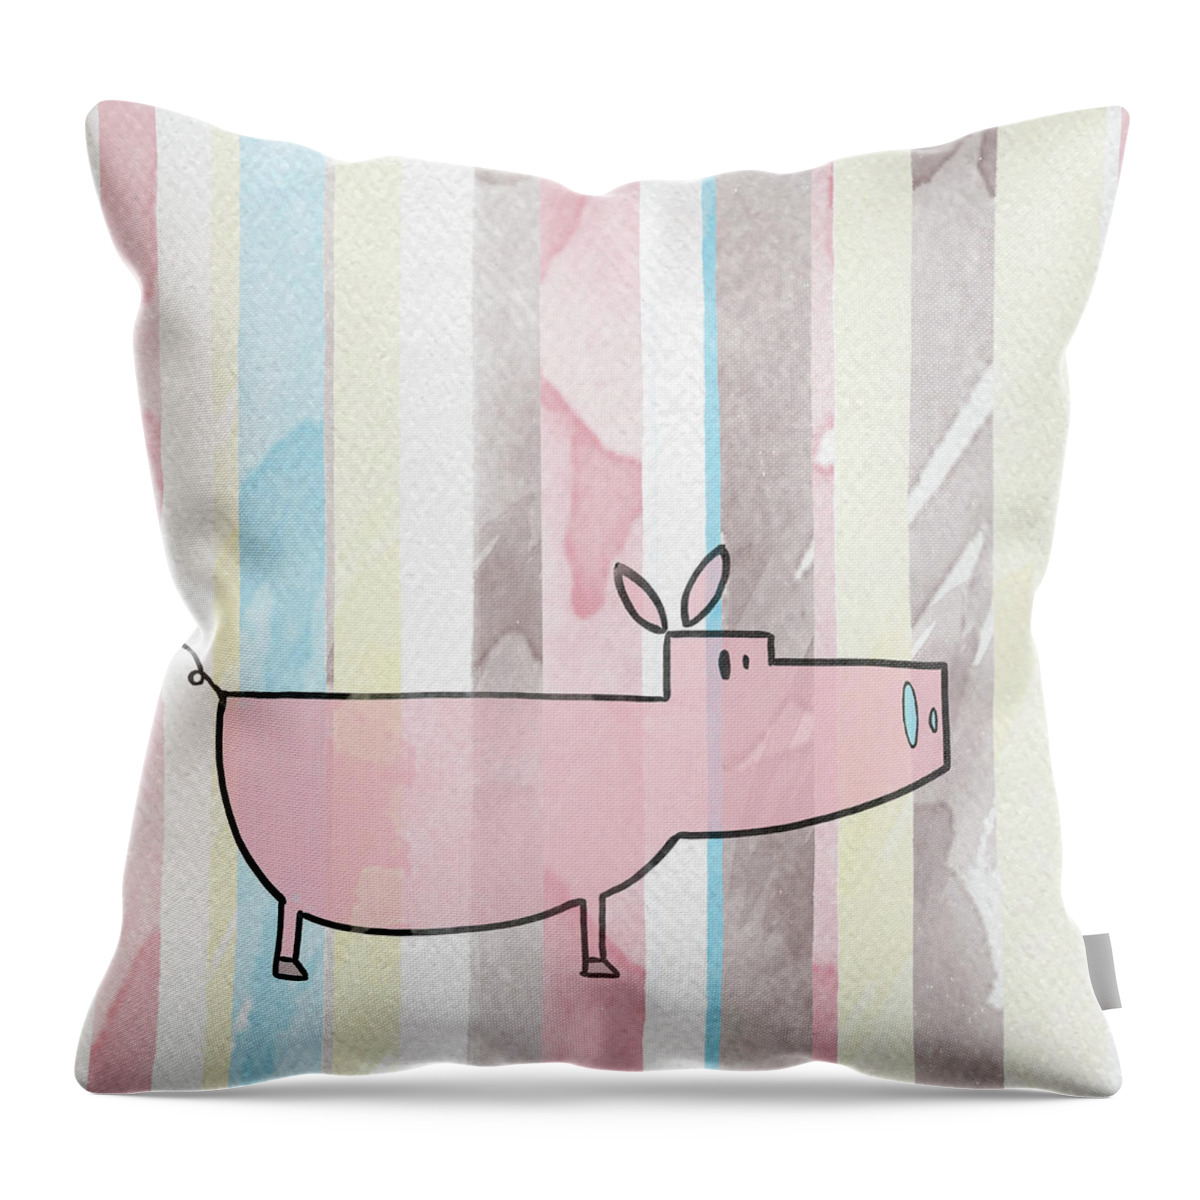 Doodle Throw Pillow featuring the mixed media Doodle Farm On Watercolor II by Shelley Lake